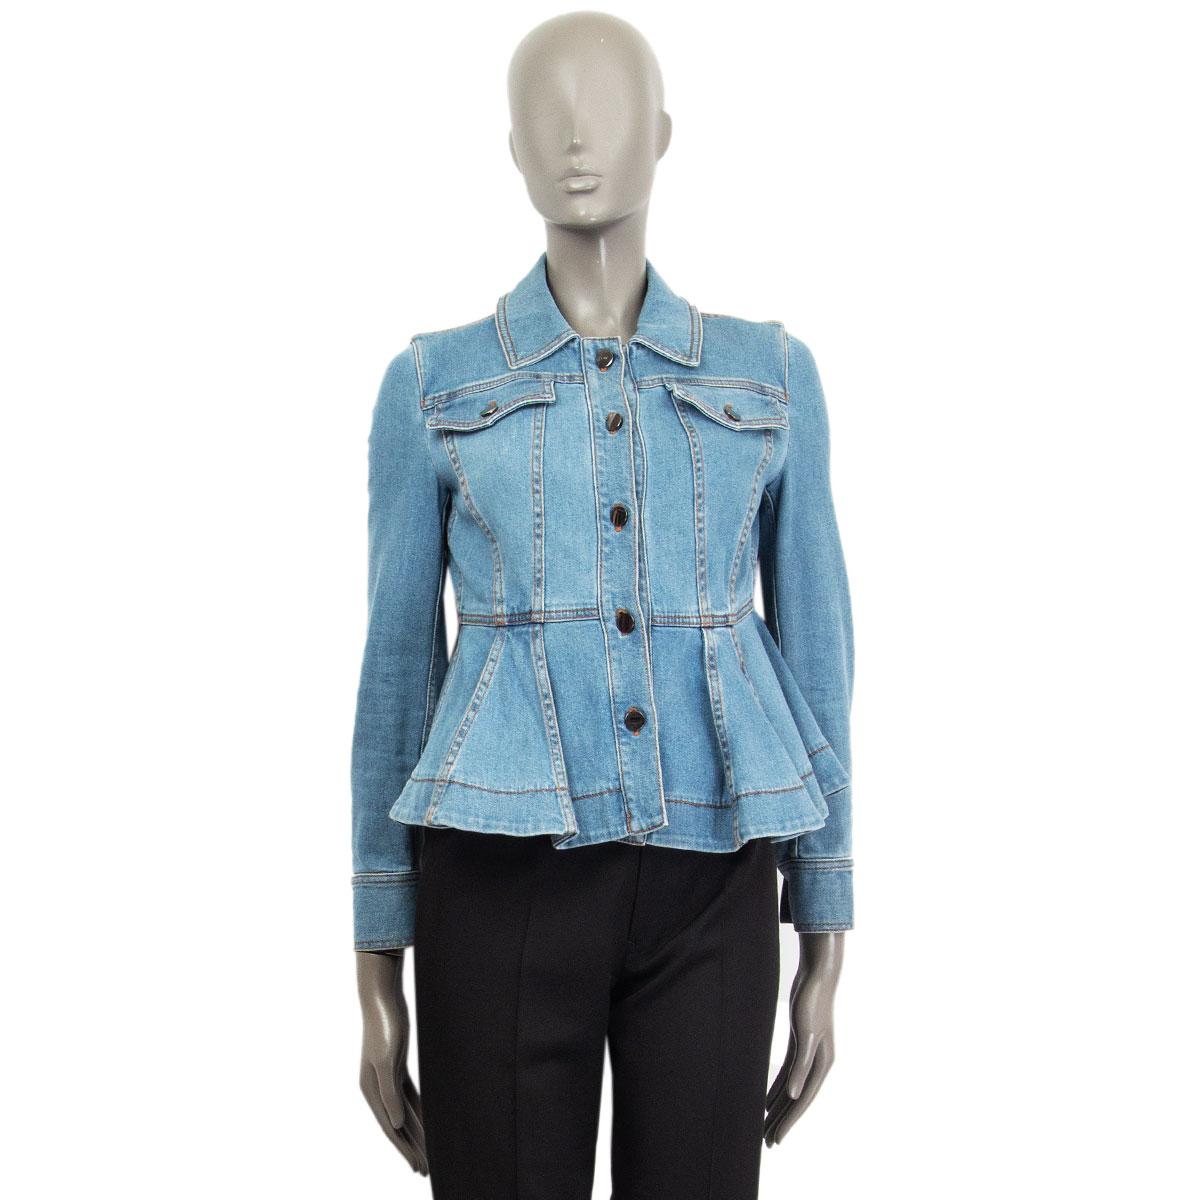 100% authentic Fendi stretch denim peplum jacket in denim blue cotton and elastane (missing content tag) with buttoned flap pockets at the chest. Closes with five buttons at front. Unlined. Has been worn and is in excellent